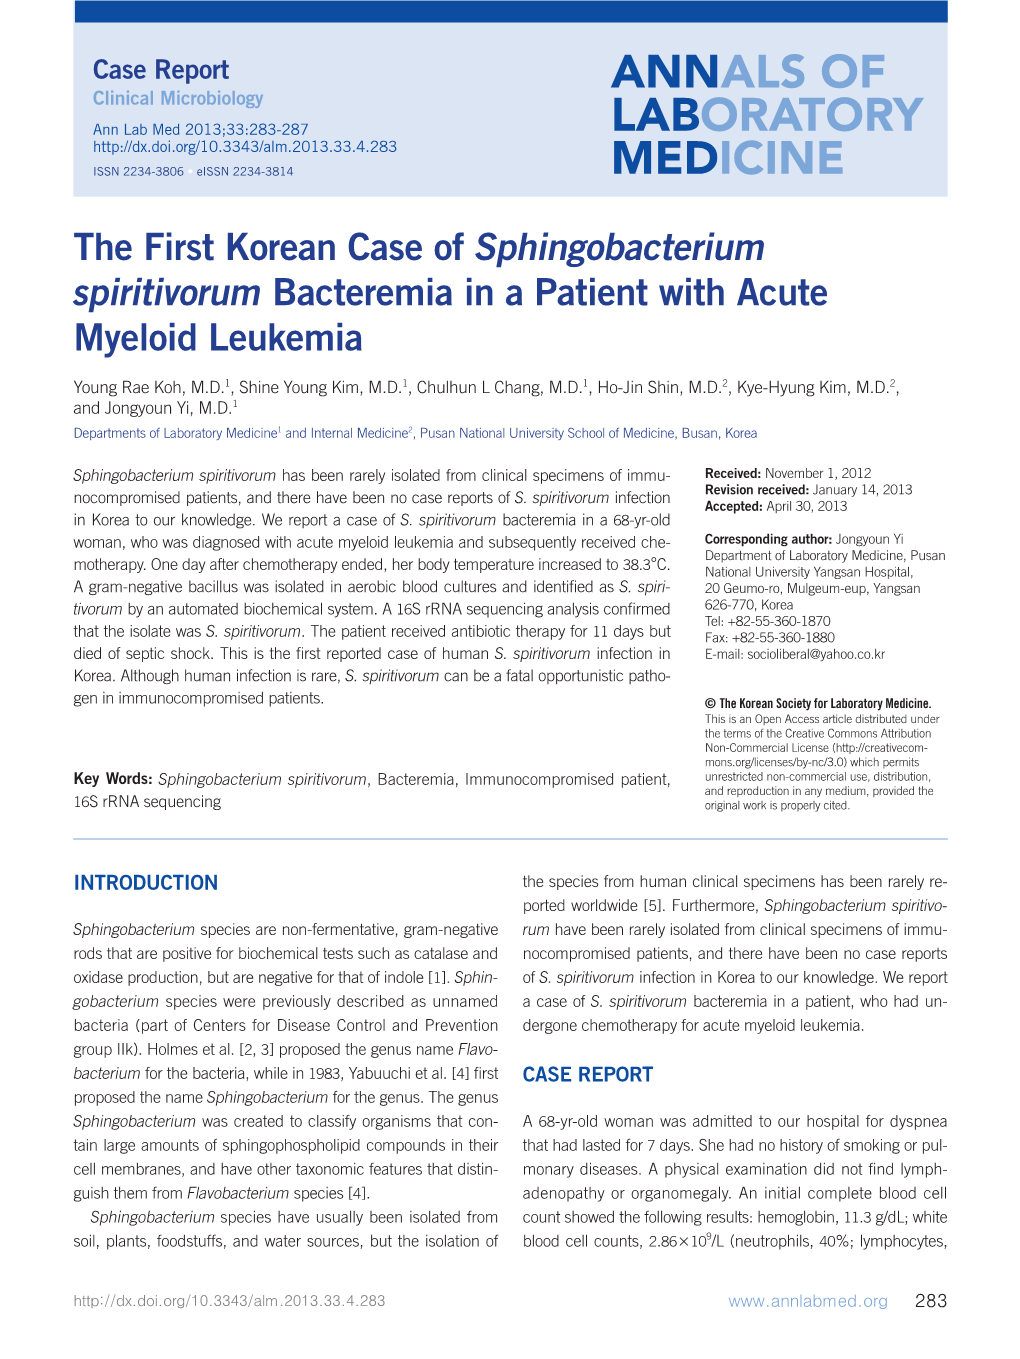 The First Korean Case of Sphingobacterium Spiritivorum Bacteremia in a Patient with Acute Myeloid Leukemia